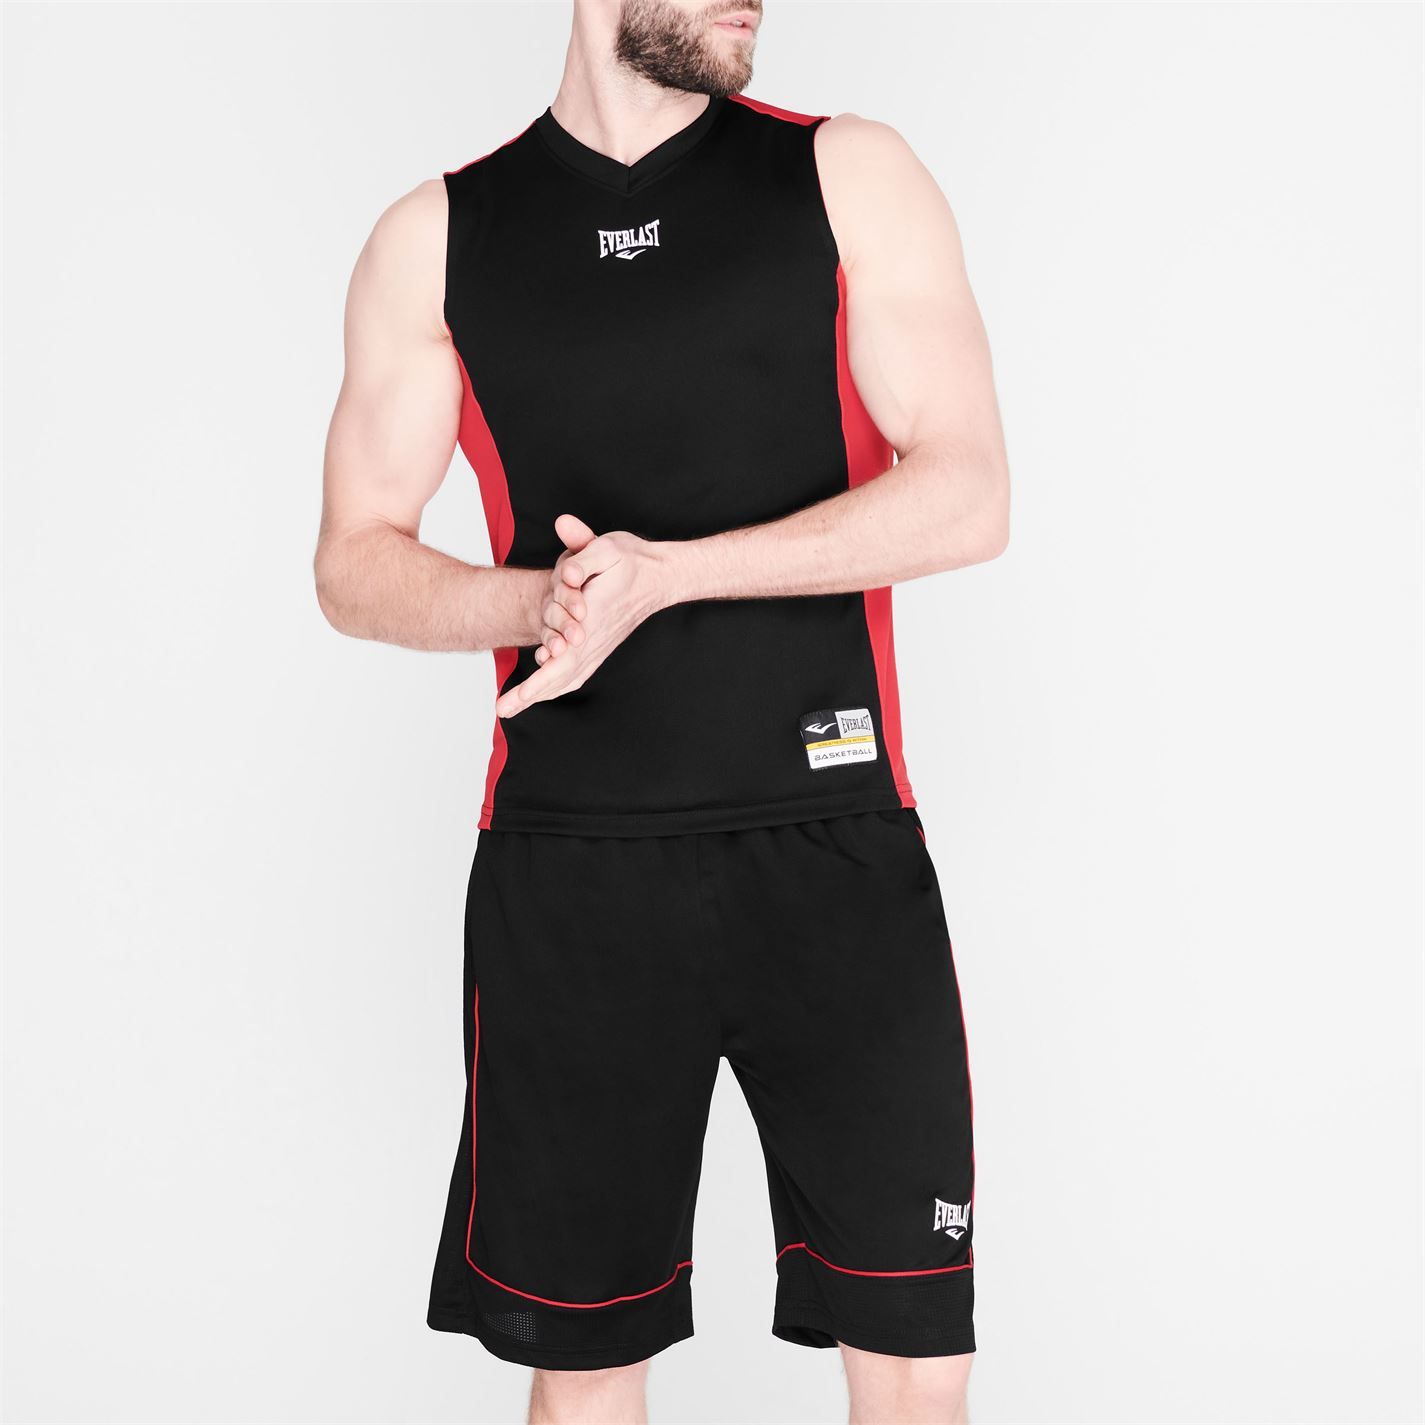 <h2>Everlast Basketball Jersey Mens</h2>
Show off your skills on the court whilst staying cool under pressure in this Everlast Basketball Jersey. The jersey is designed with a v-neck collar and a sleeveless style for a comfortable fit and benefits from a mesh back panel for breathability and ventilation to improve body temperature. Contrasting panels and Everlast branding finishes off the design of the jersey for a great look.

> Mens basketball top
> Sleeveless
> V-neck
> Mesh back
> Contrasting panels
> Everlast branding
> 100% polyester
> Machine washable